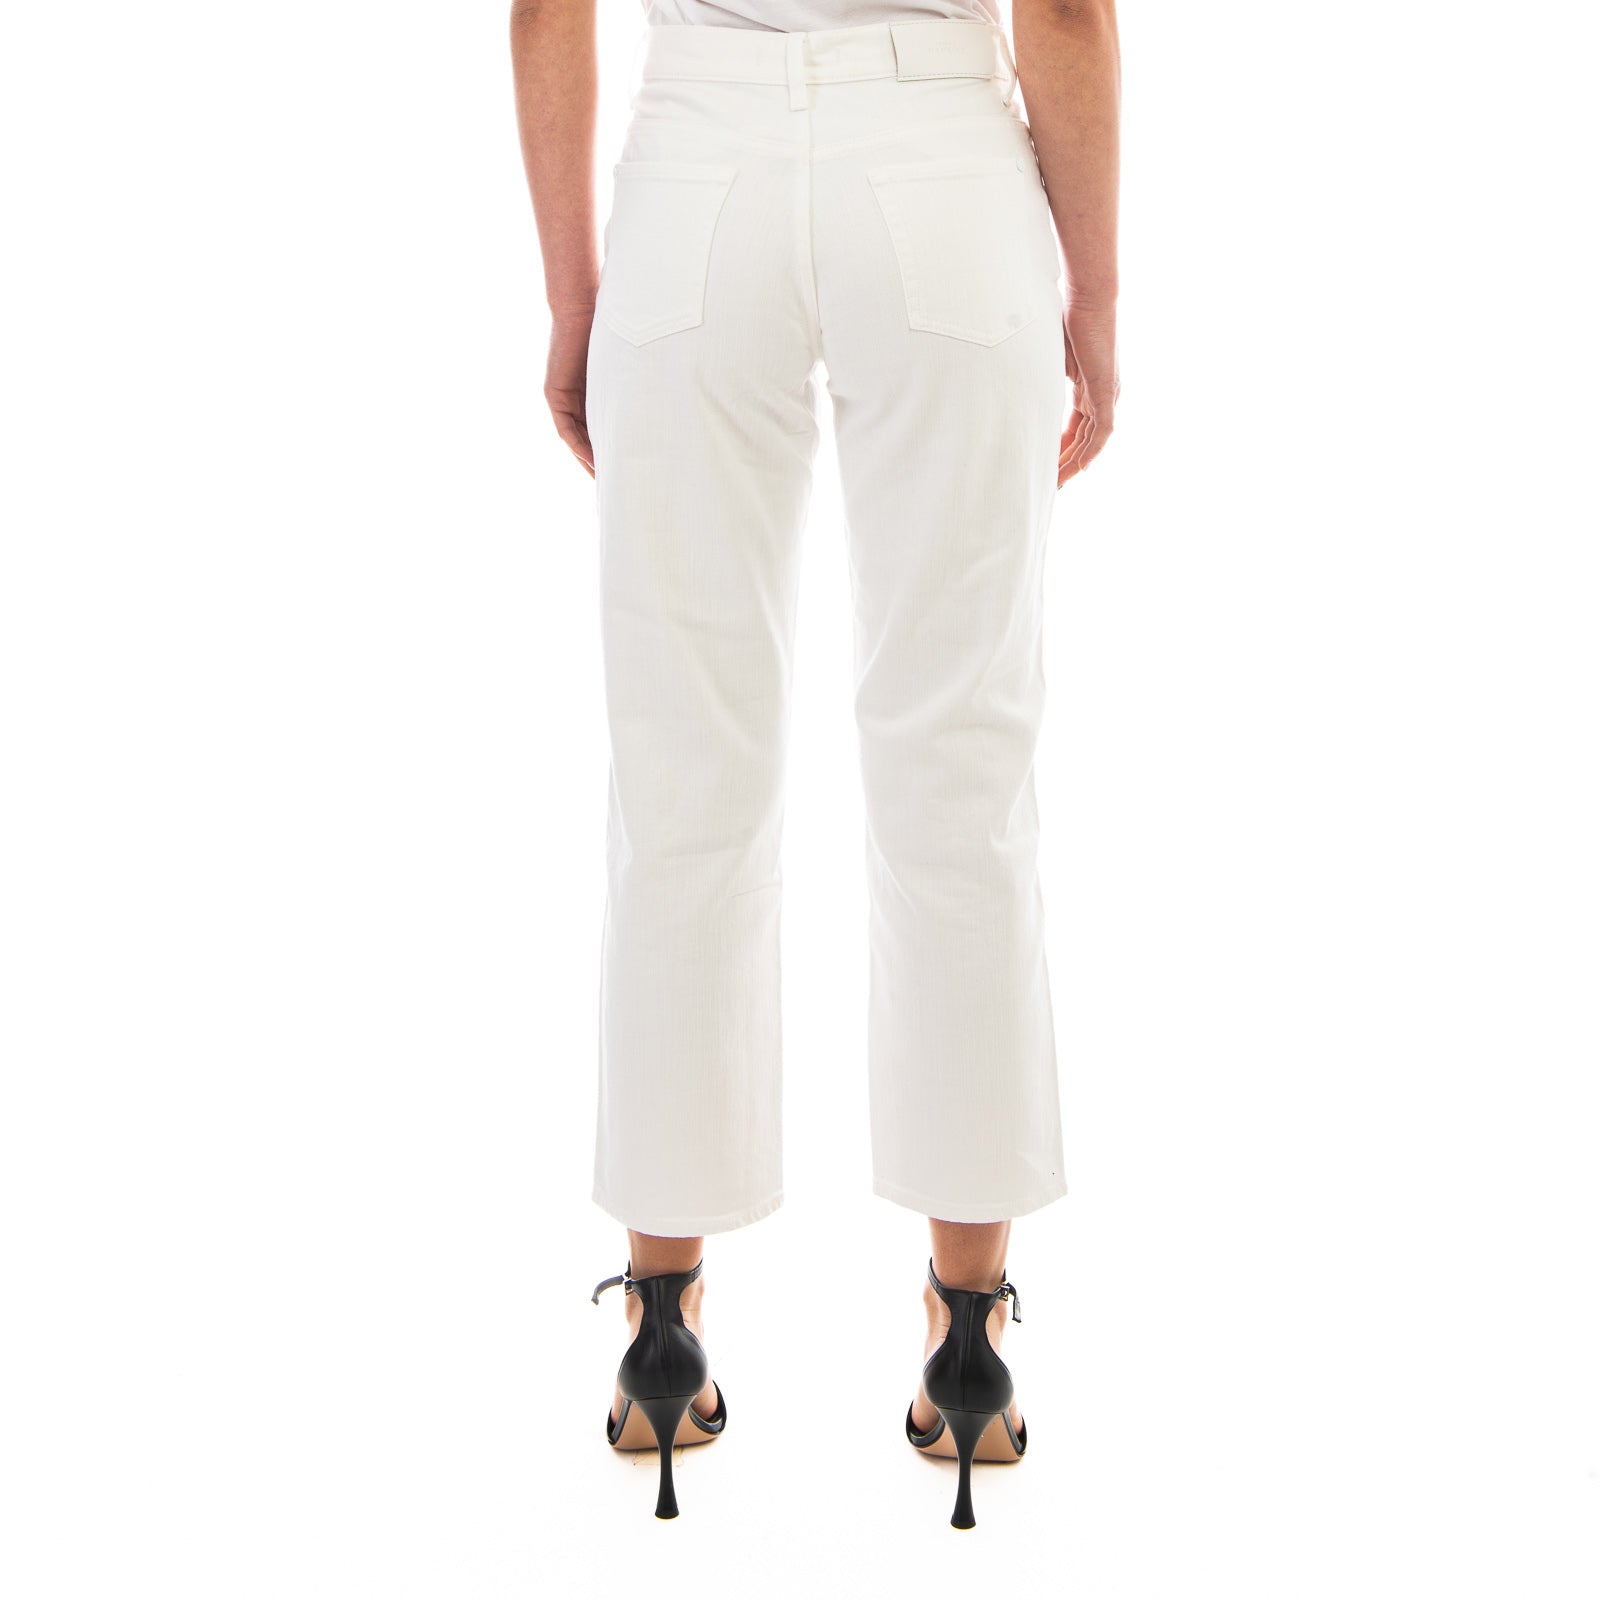 Jeans 7 FOR ALL MANKIND The modern straight
Bianco